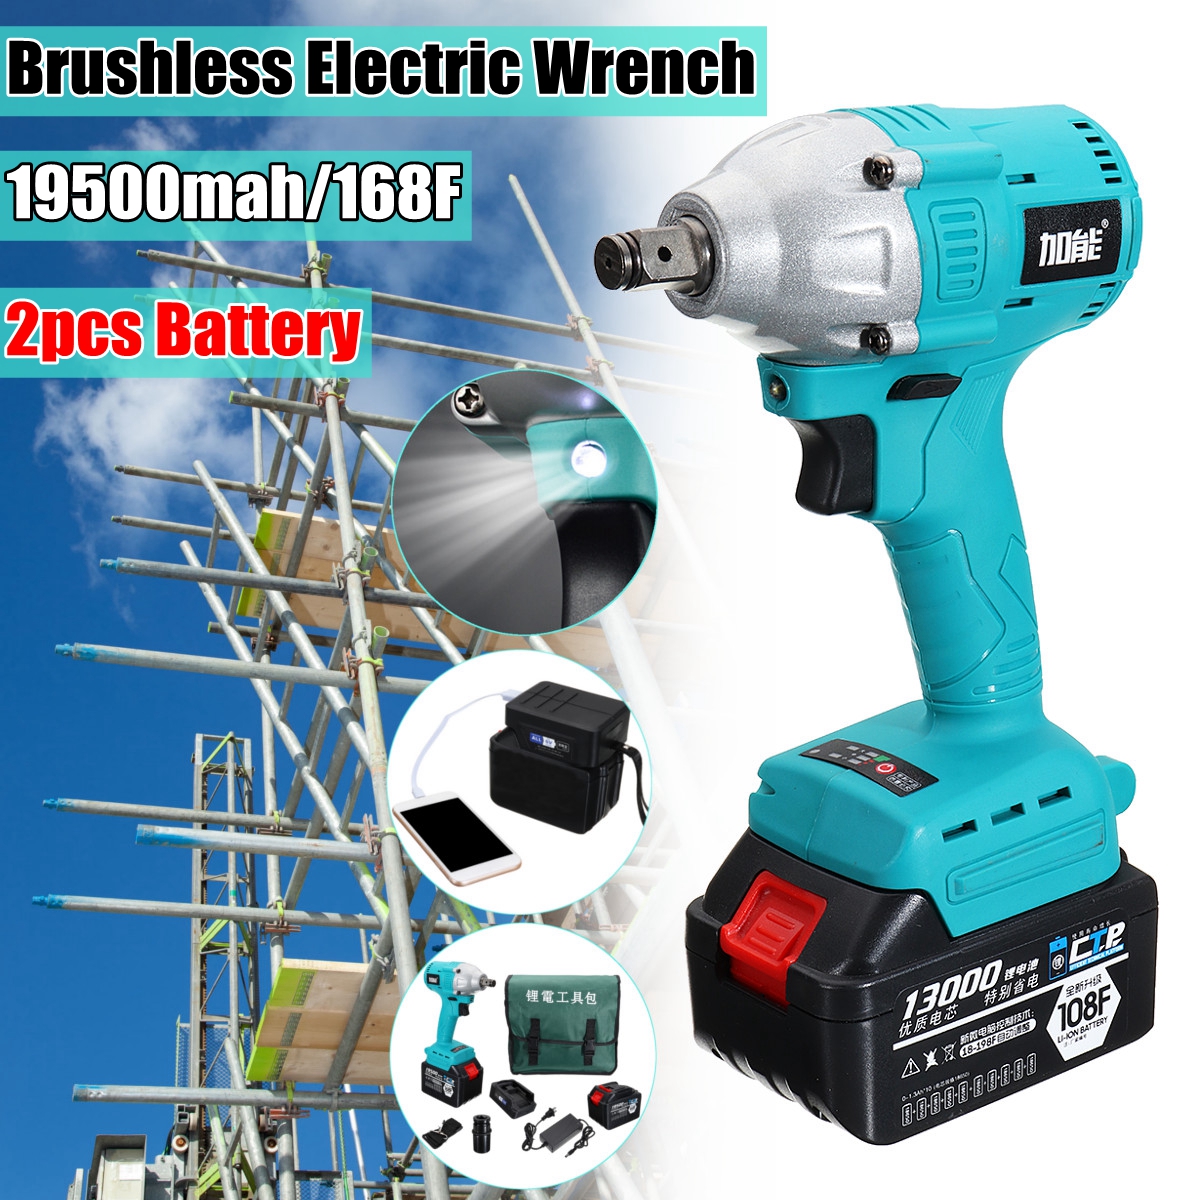 Multifunctional-Brushless-Electric-Wrench-Lithium-Power-Wrench-350Nm-Wrench-Tool-Kit-1333196-2